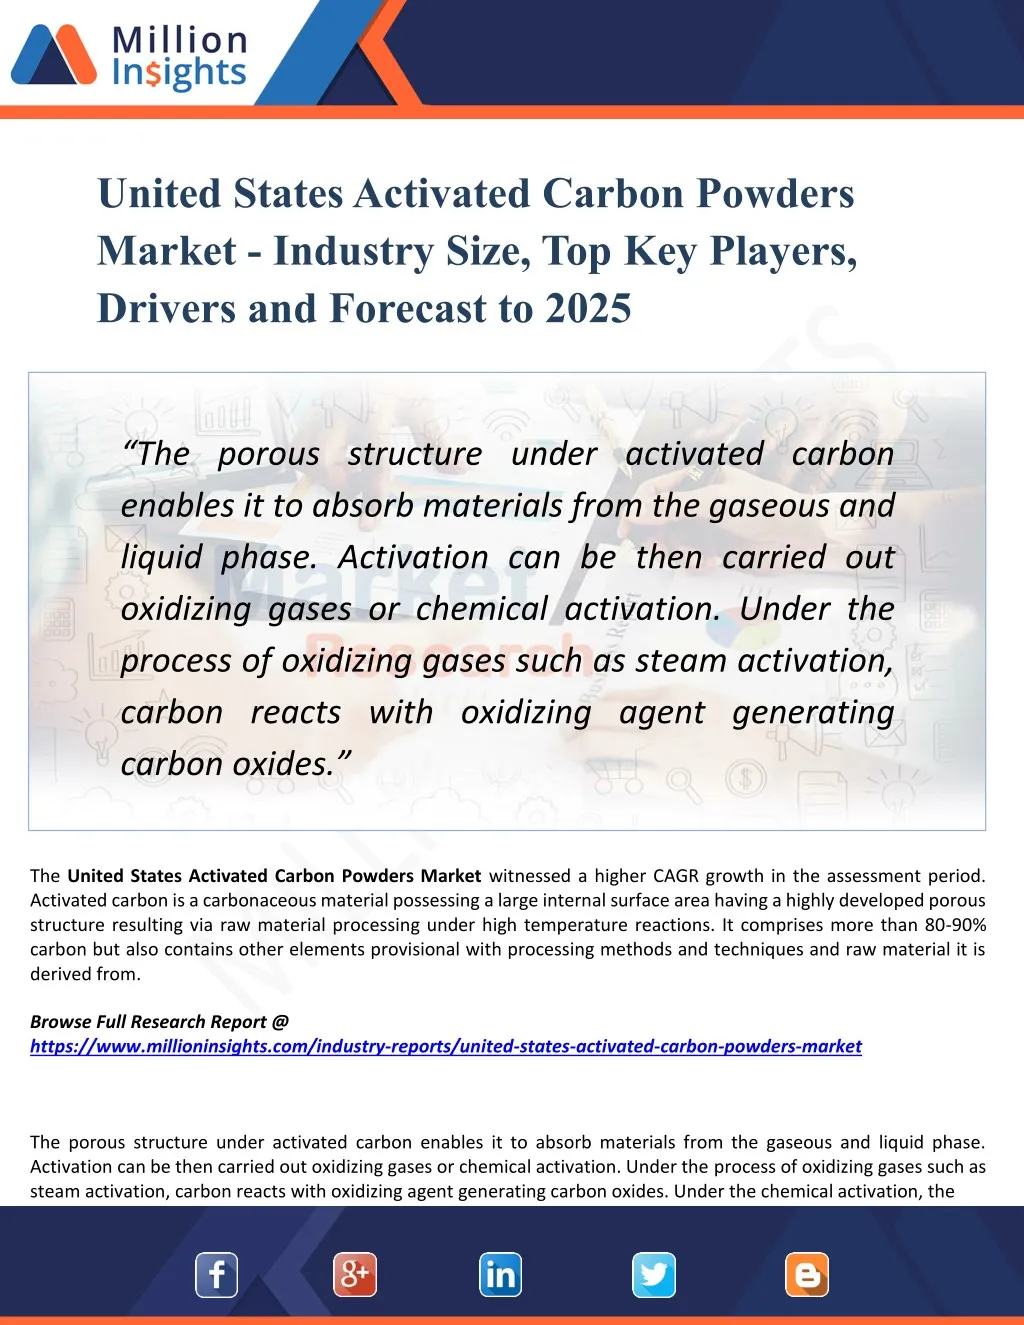 united states activated carbon powders market